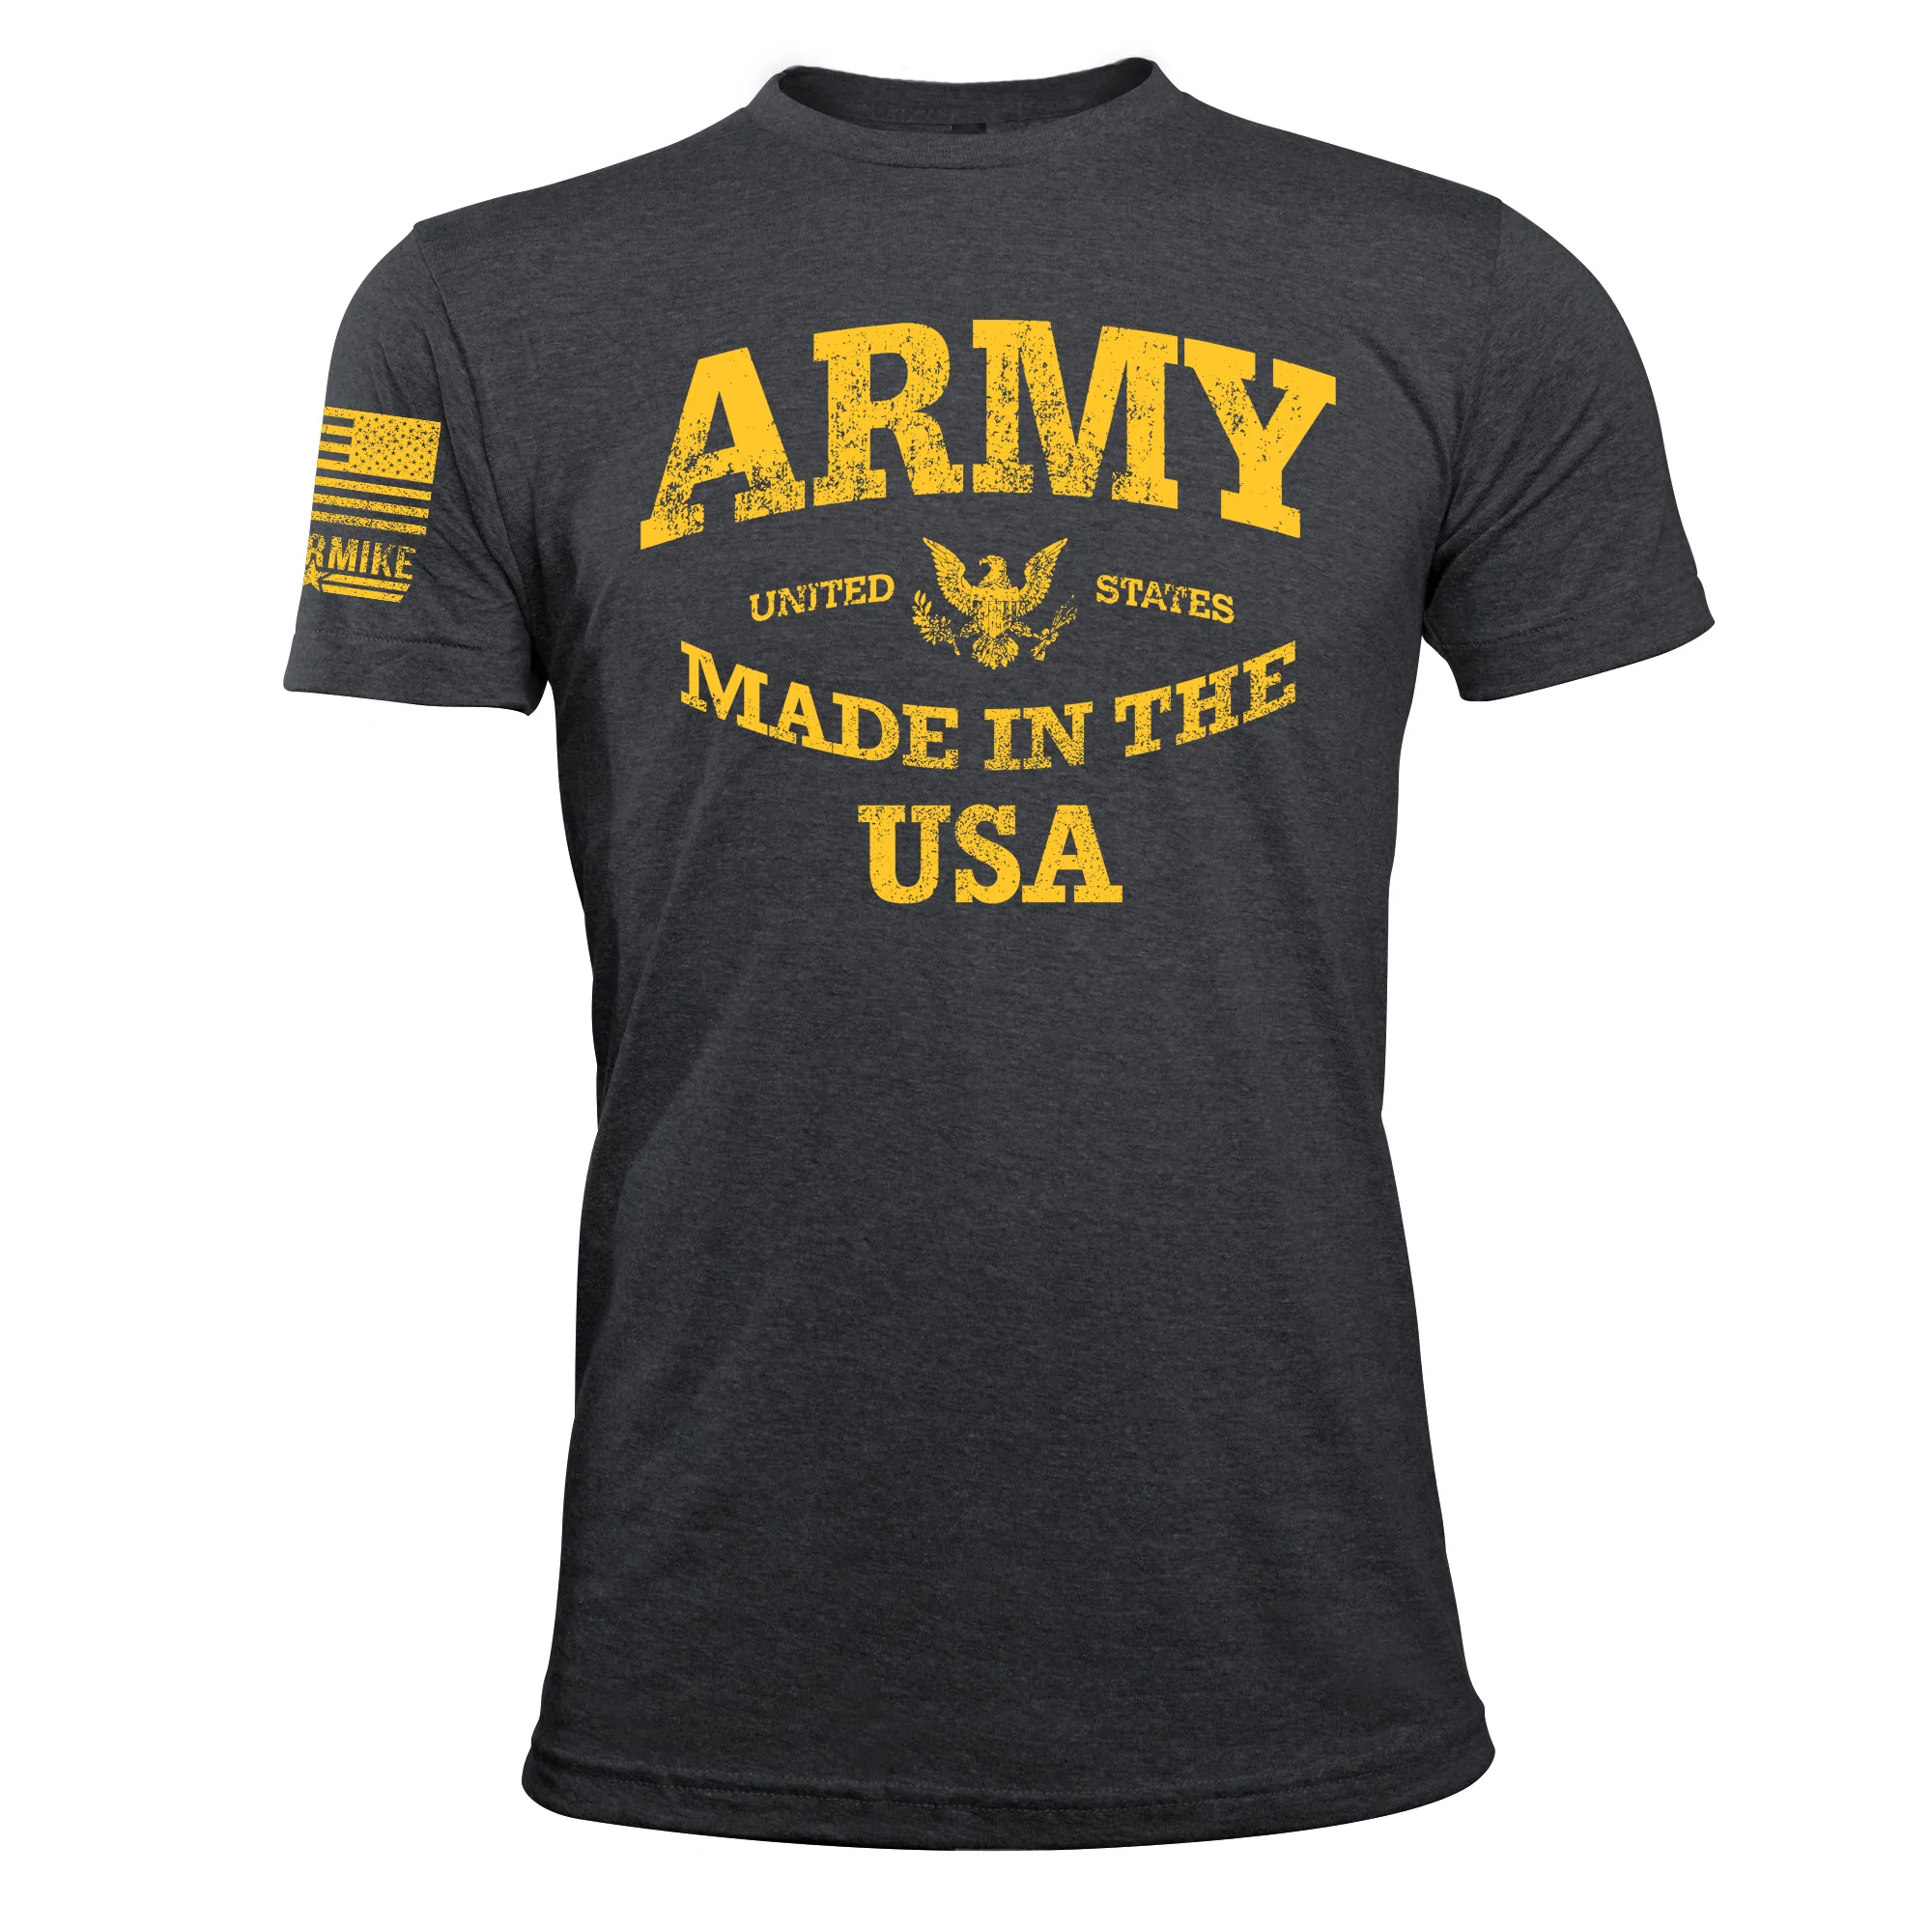 Oscar Mike Men's Army Made in the USA Tee posted by ProdOrigin USA in Men's Apparel